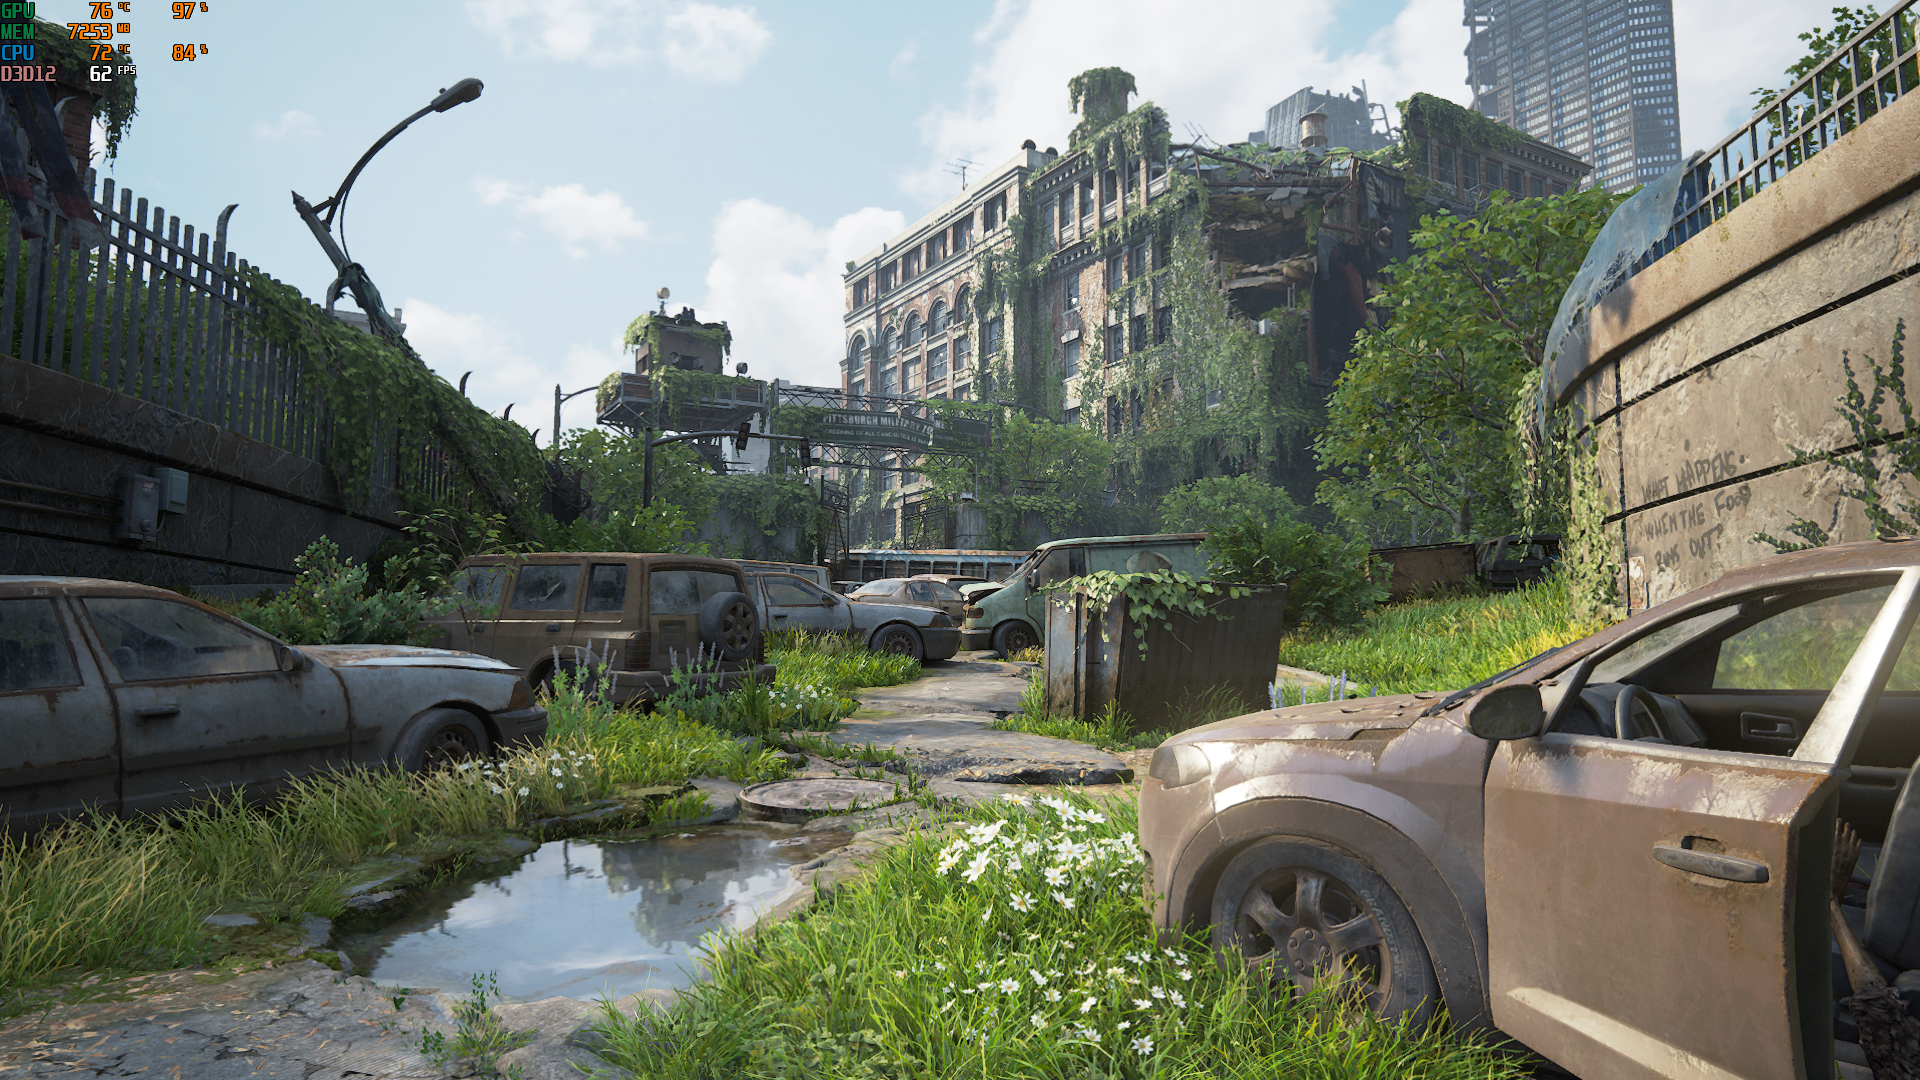 The Last Of Us PlayStation Playstation 5 Video Games Ellie Williams Car Video Game Art City 1920x1080